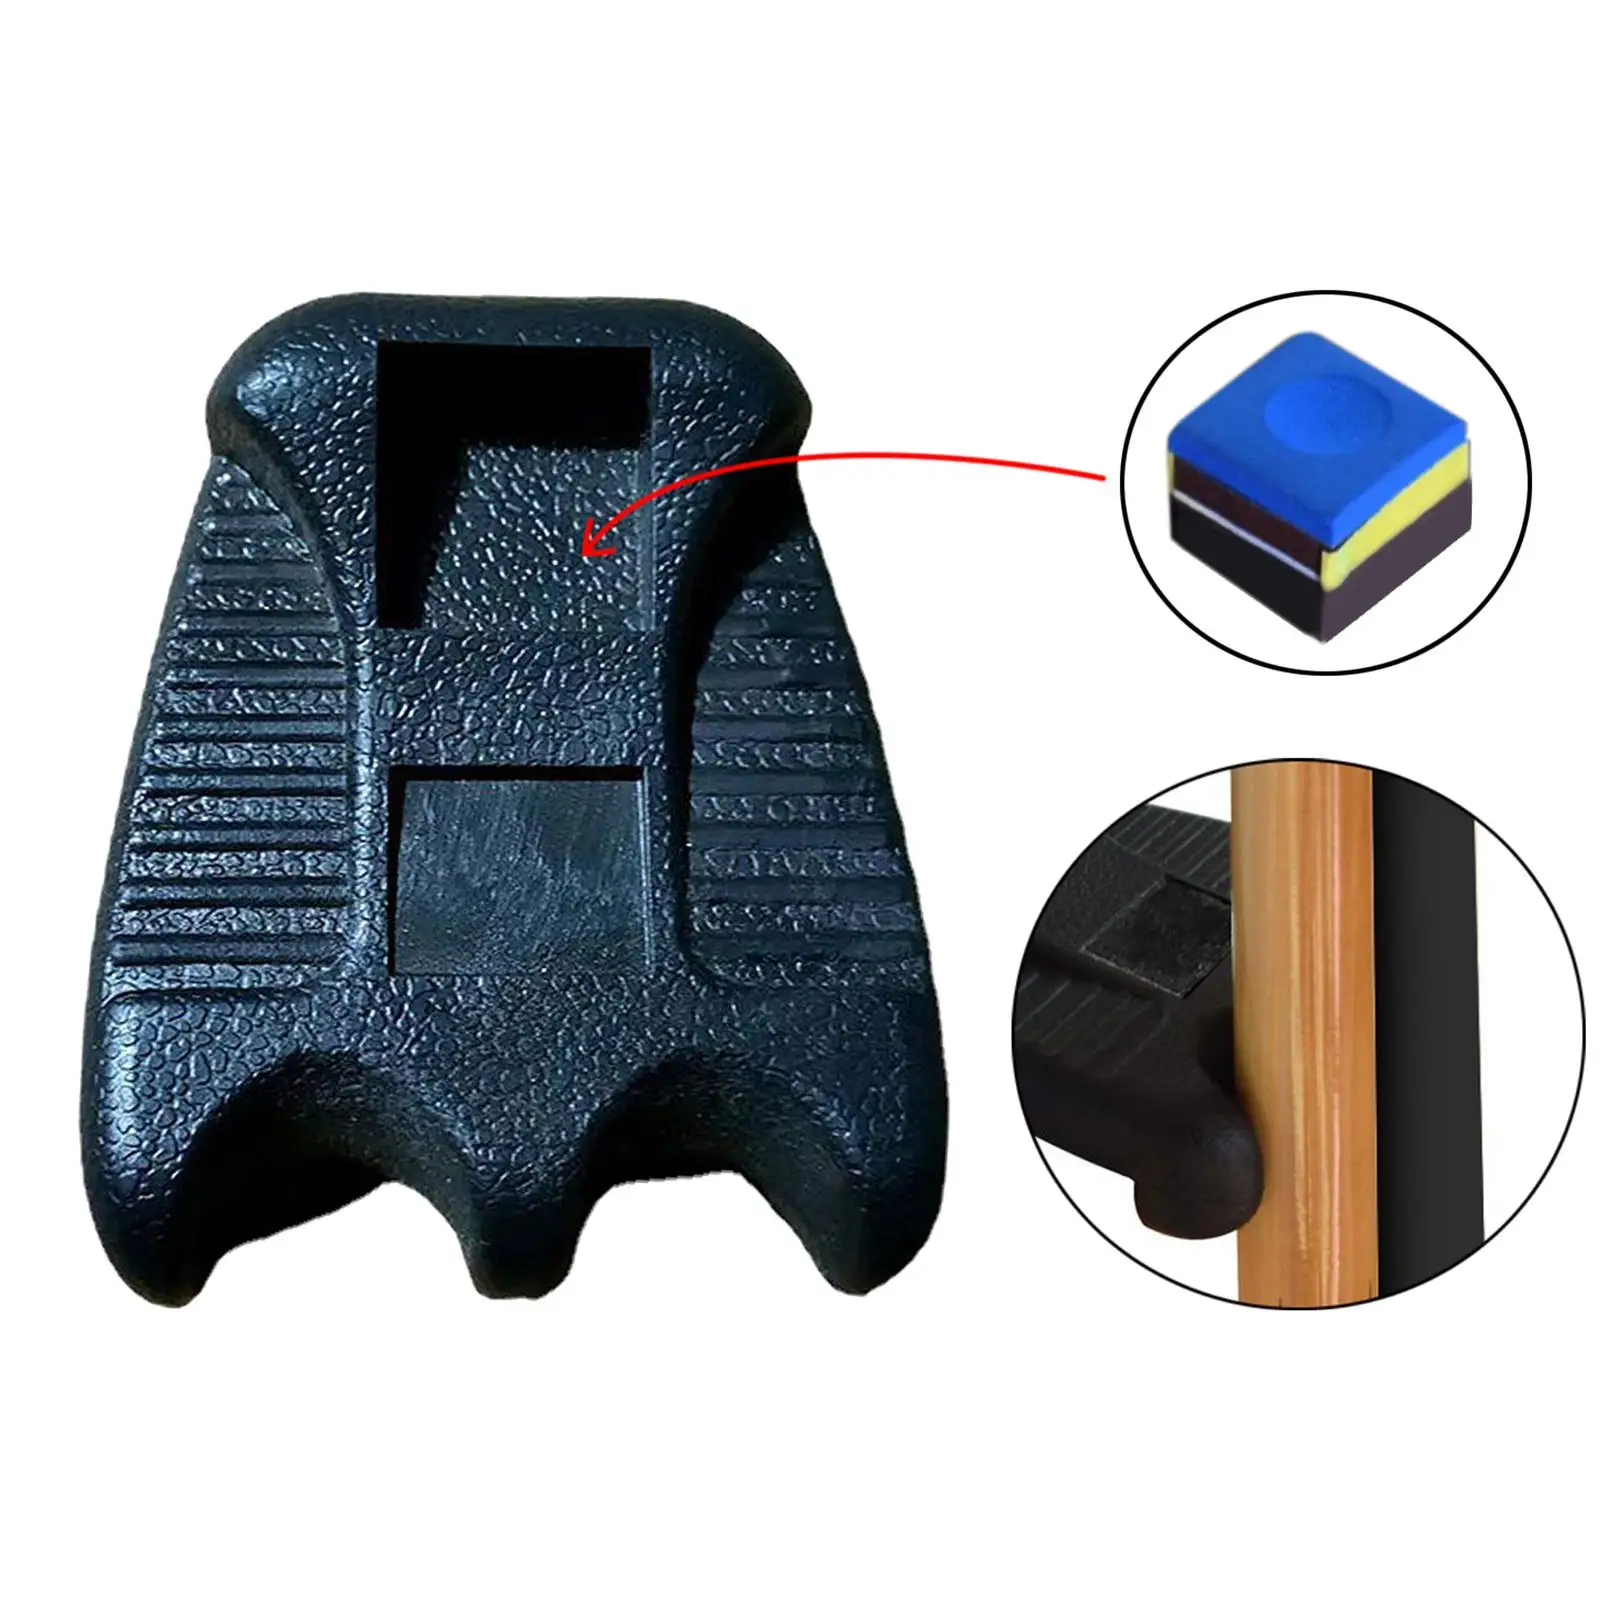 Pool Cue Holder Claw 2-cue Portable Durable for Snooker Cue Snooker Cue Rest